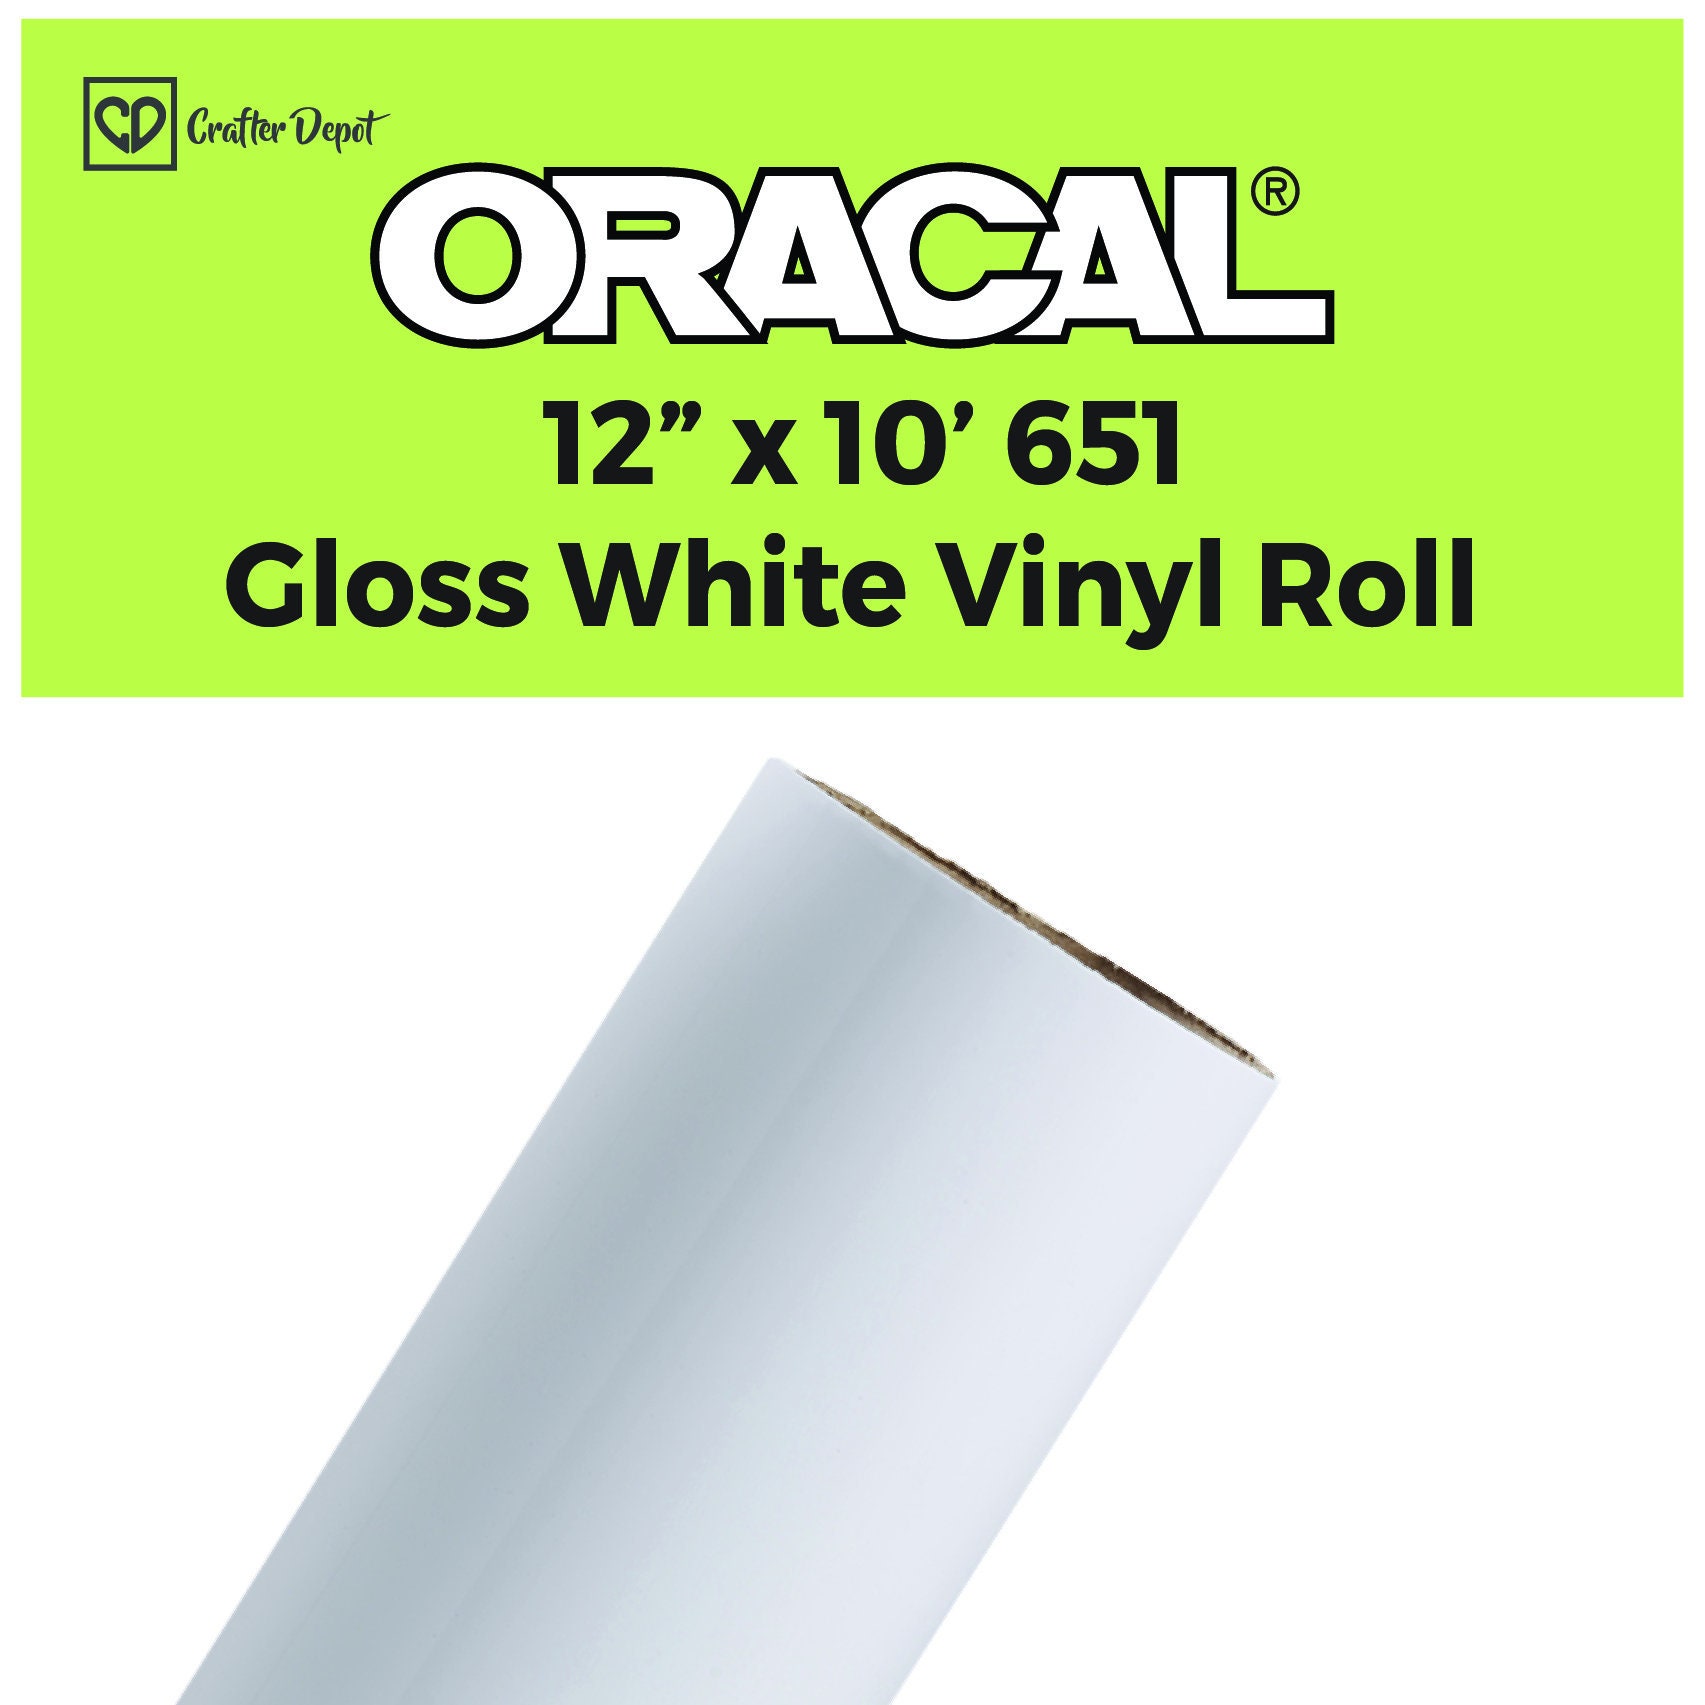 Oracal 651 Adhesive Vinyl Roll in the 15 Inch x 5 Yard Roll Size